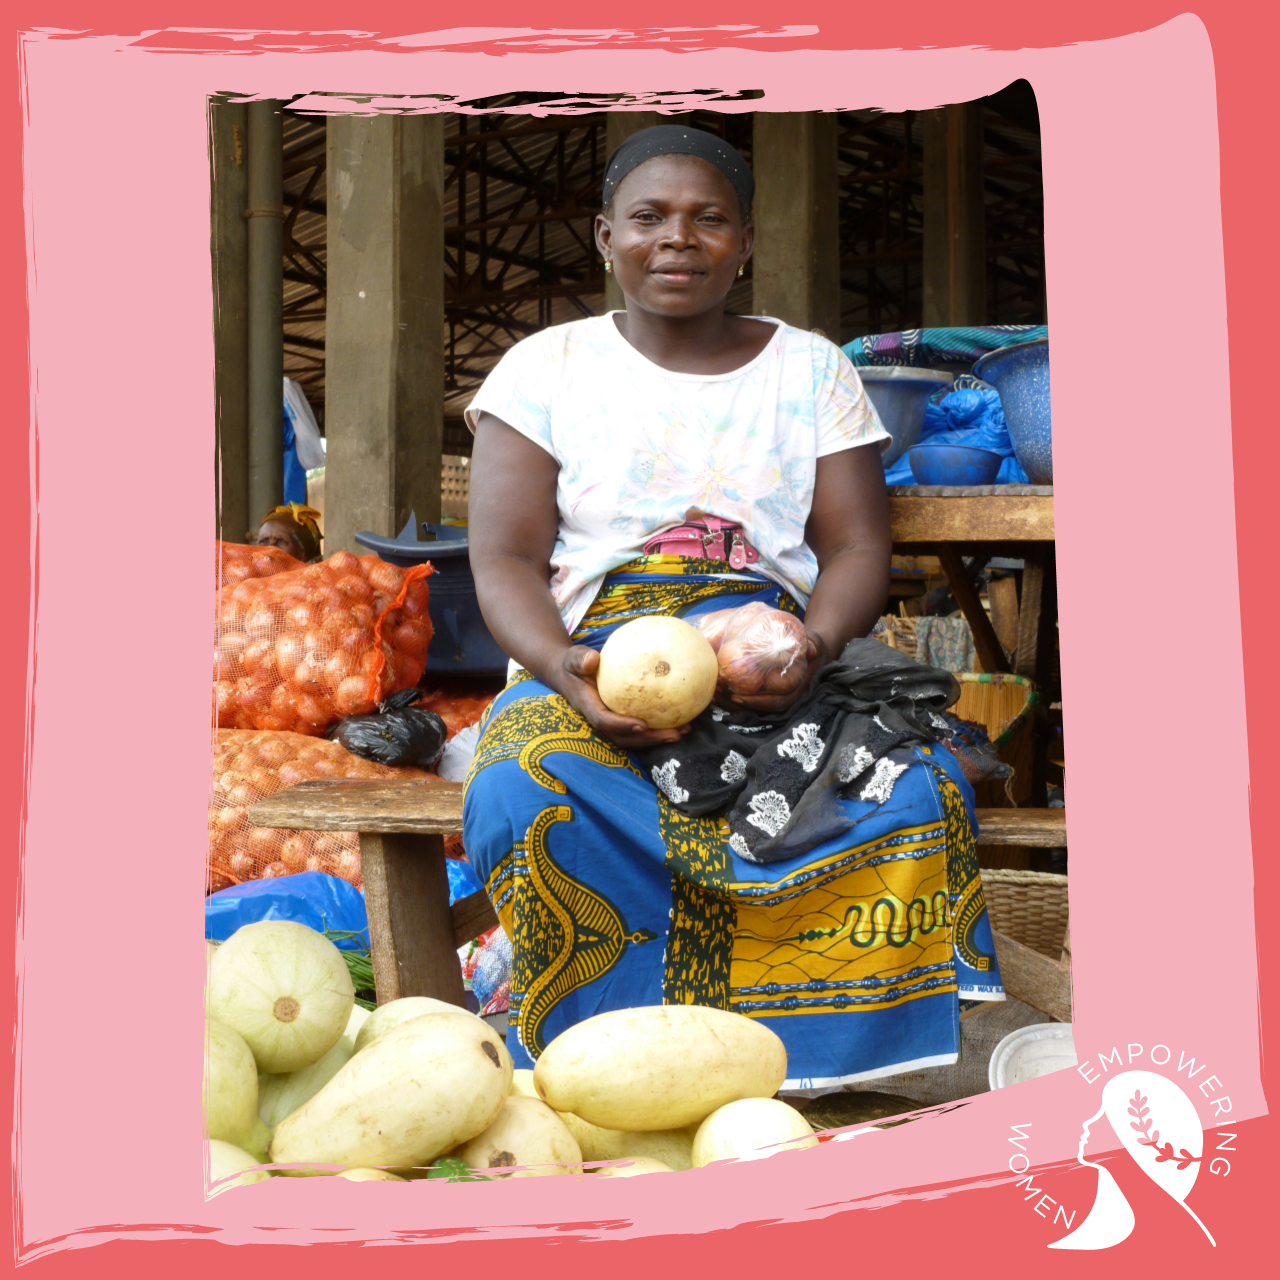 Previously, the family's activities did not allow them to put aside a single penny. Today, Araliatou is happy to save between 1,000 and 3,000 CFA francs (€1.5 to €4.5) per week and to be able to buy clothes for the whole family and soap to wash them. She has even been able to take her children to the hospital when they are sick.